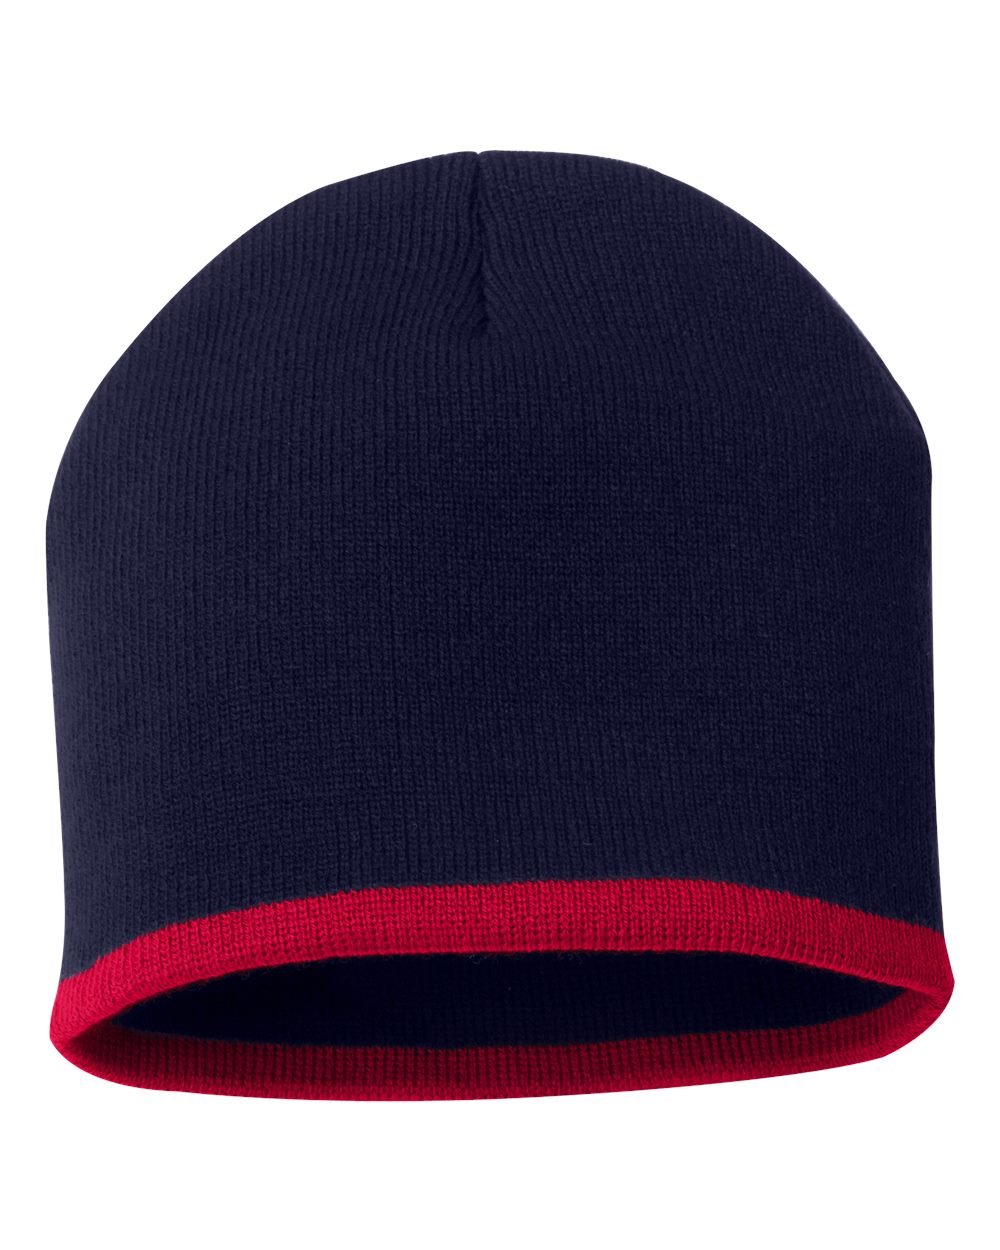 Sportsman 8" Bottom-Striped Knit Beanie SP09 #color_Navy/ Red